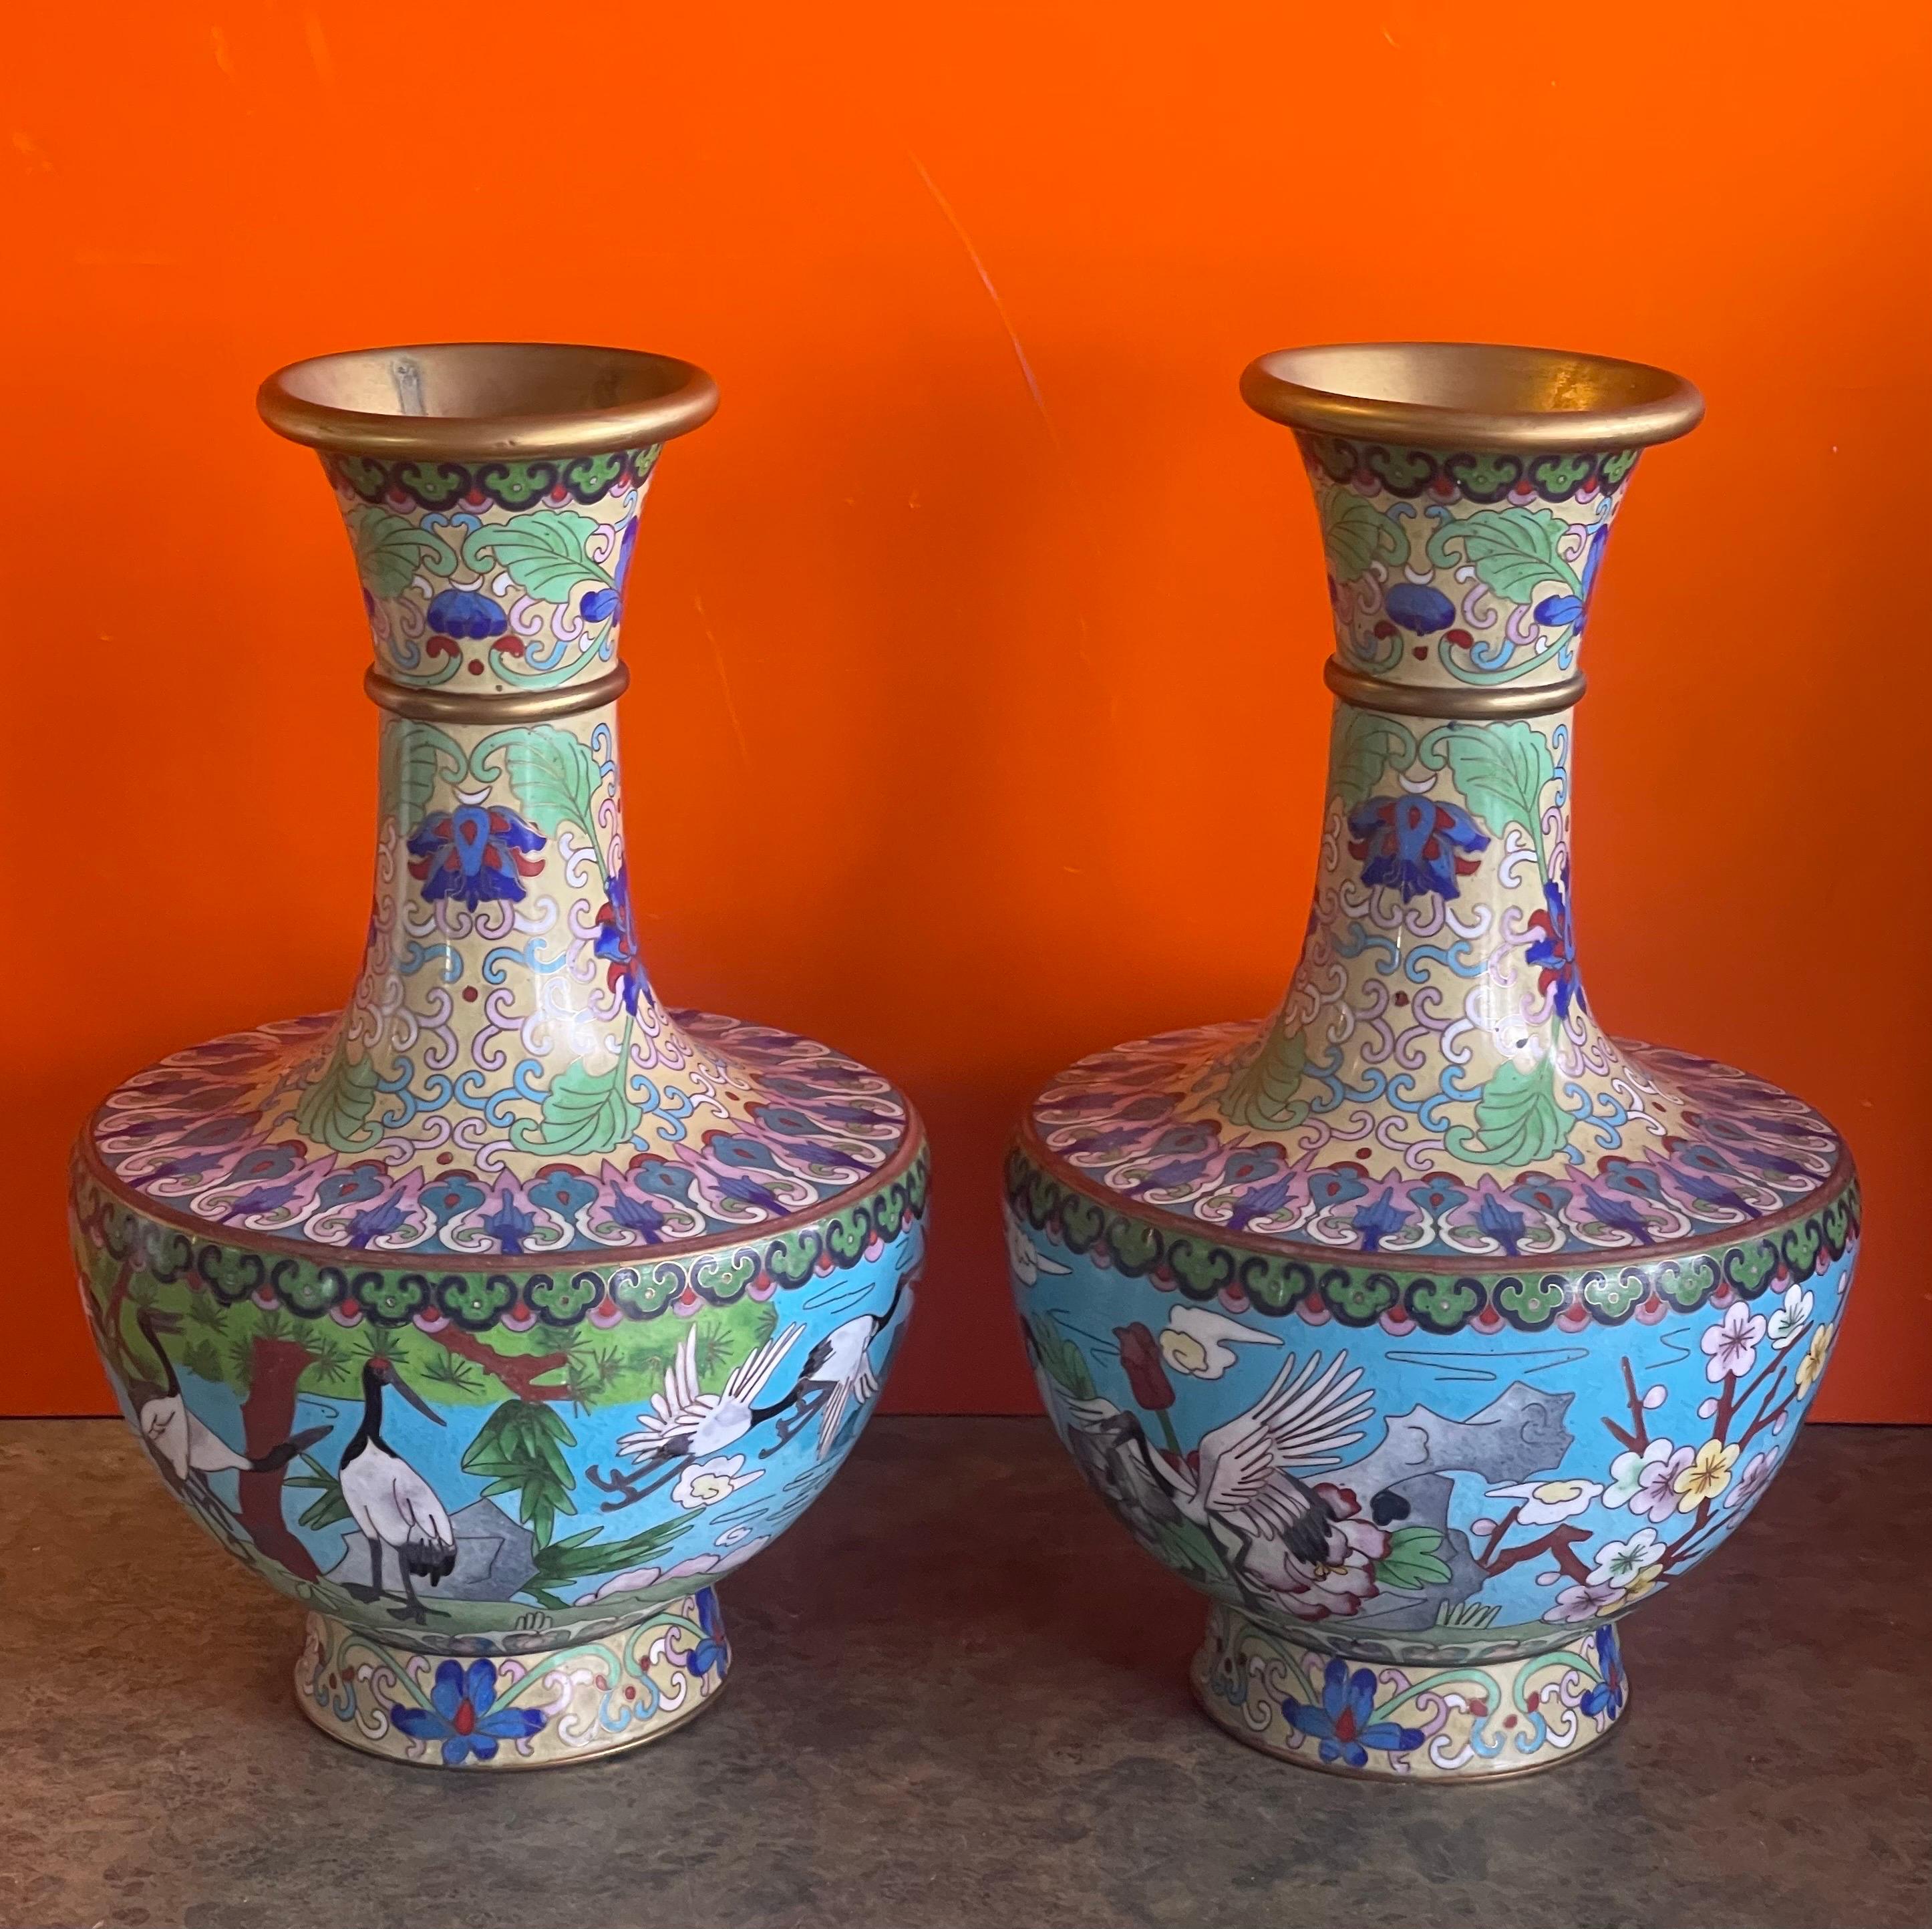 Mirrored Pair of Chinese Cloisonne Vases with Crane Motif 1